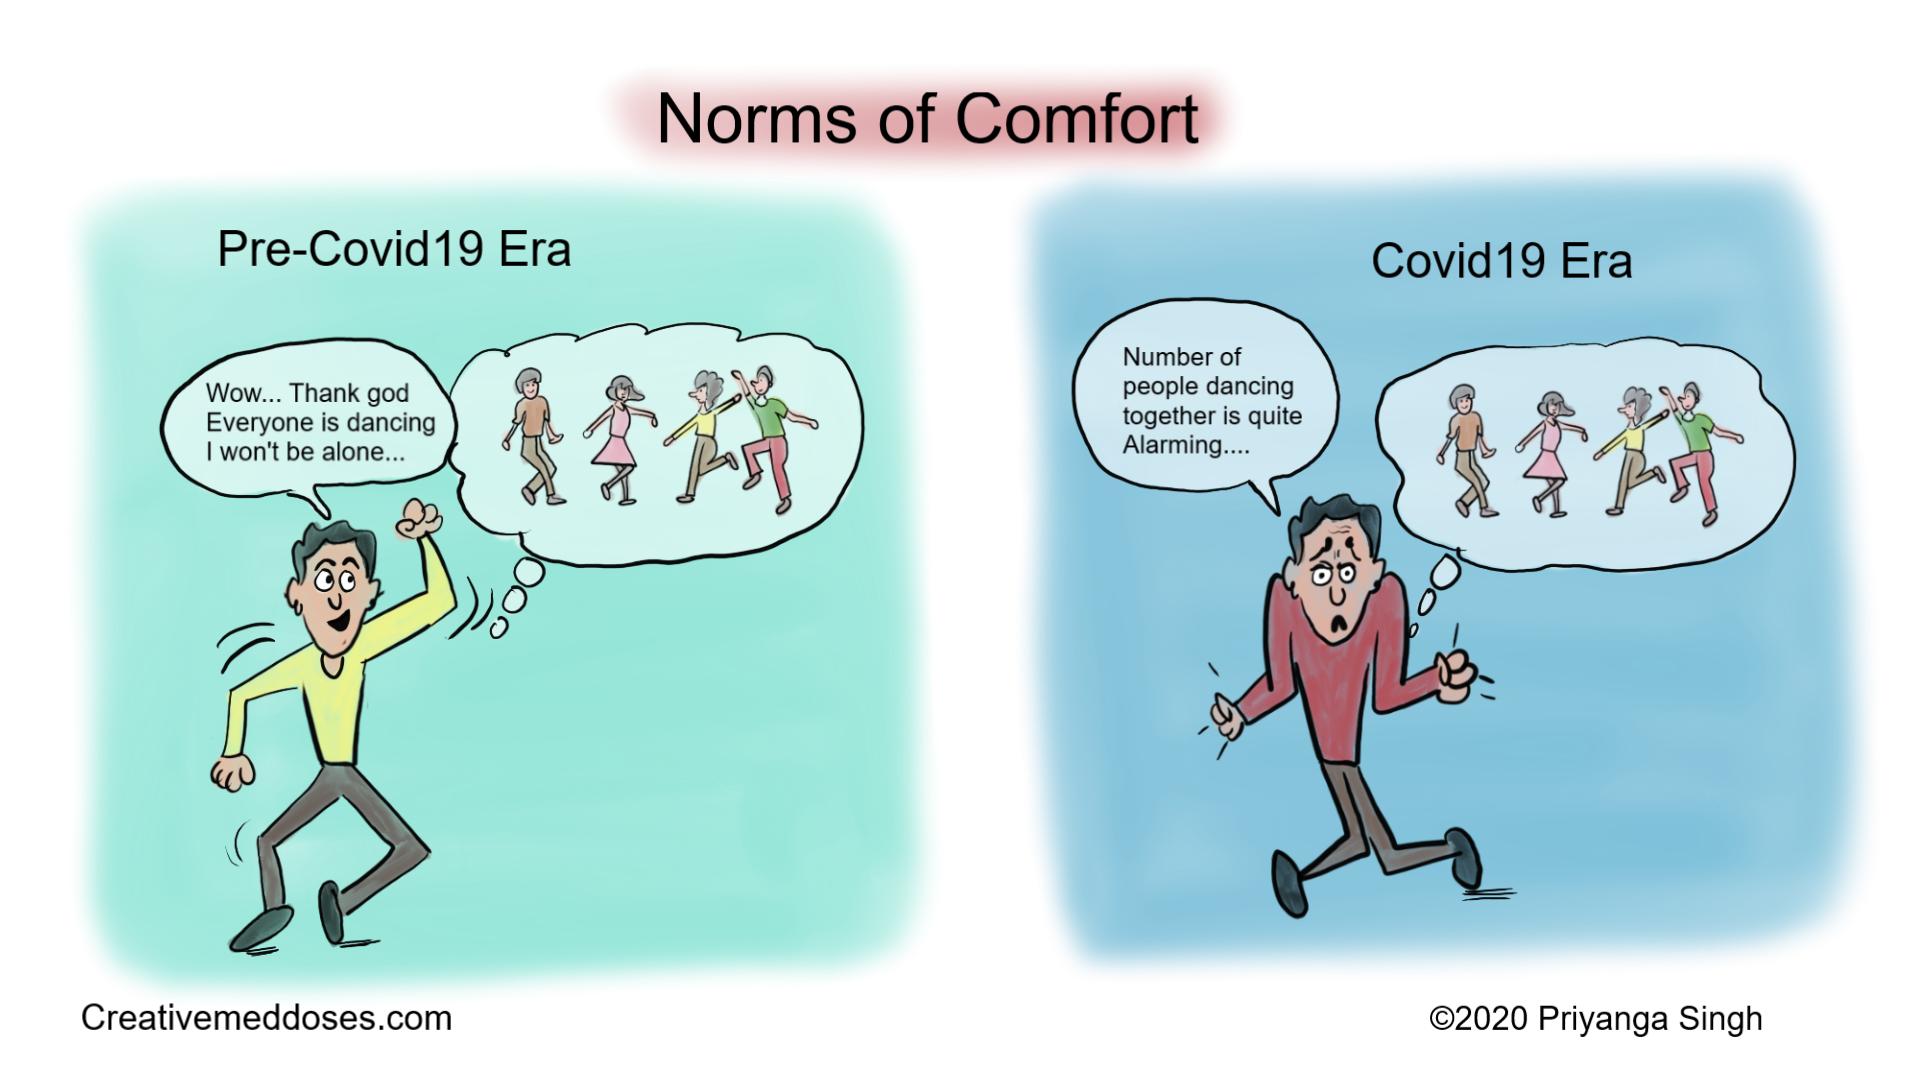 Covid19 Era  Changing norms of comfort  